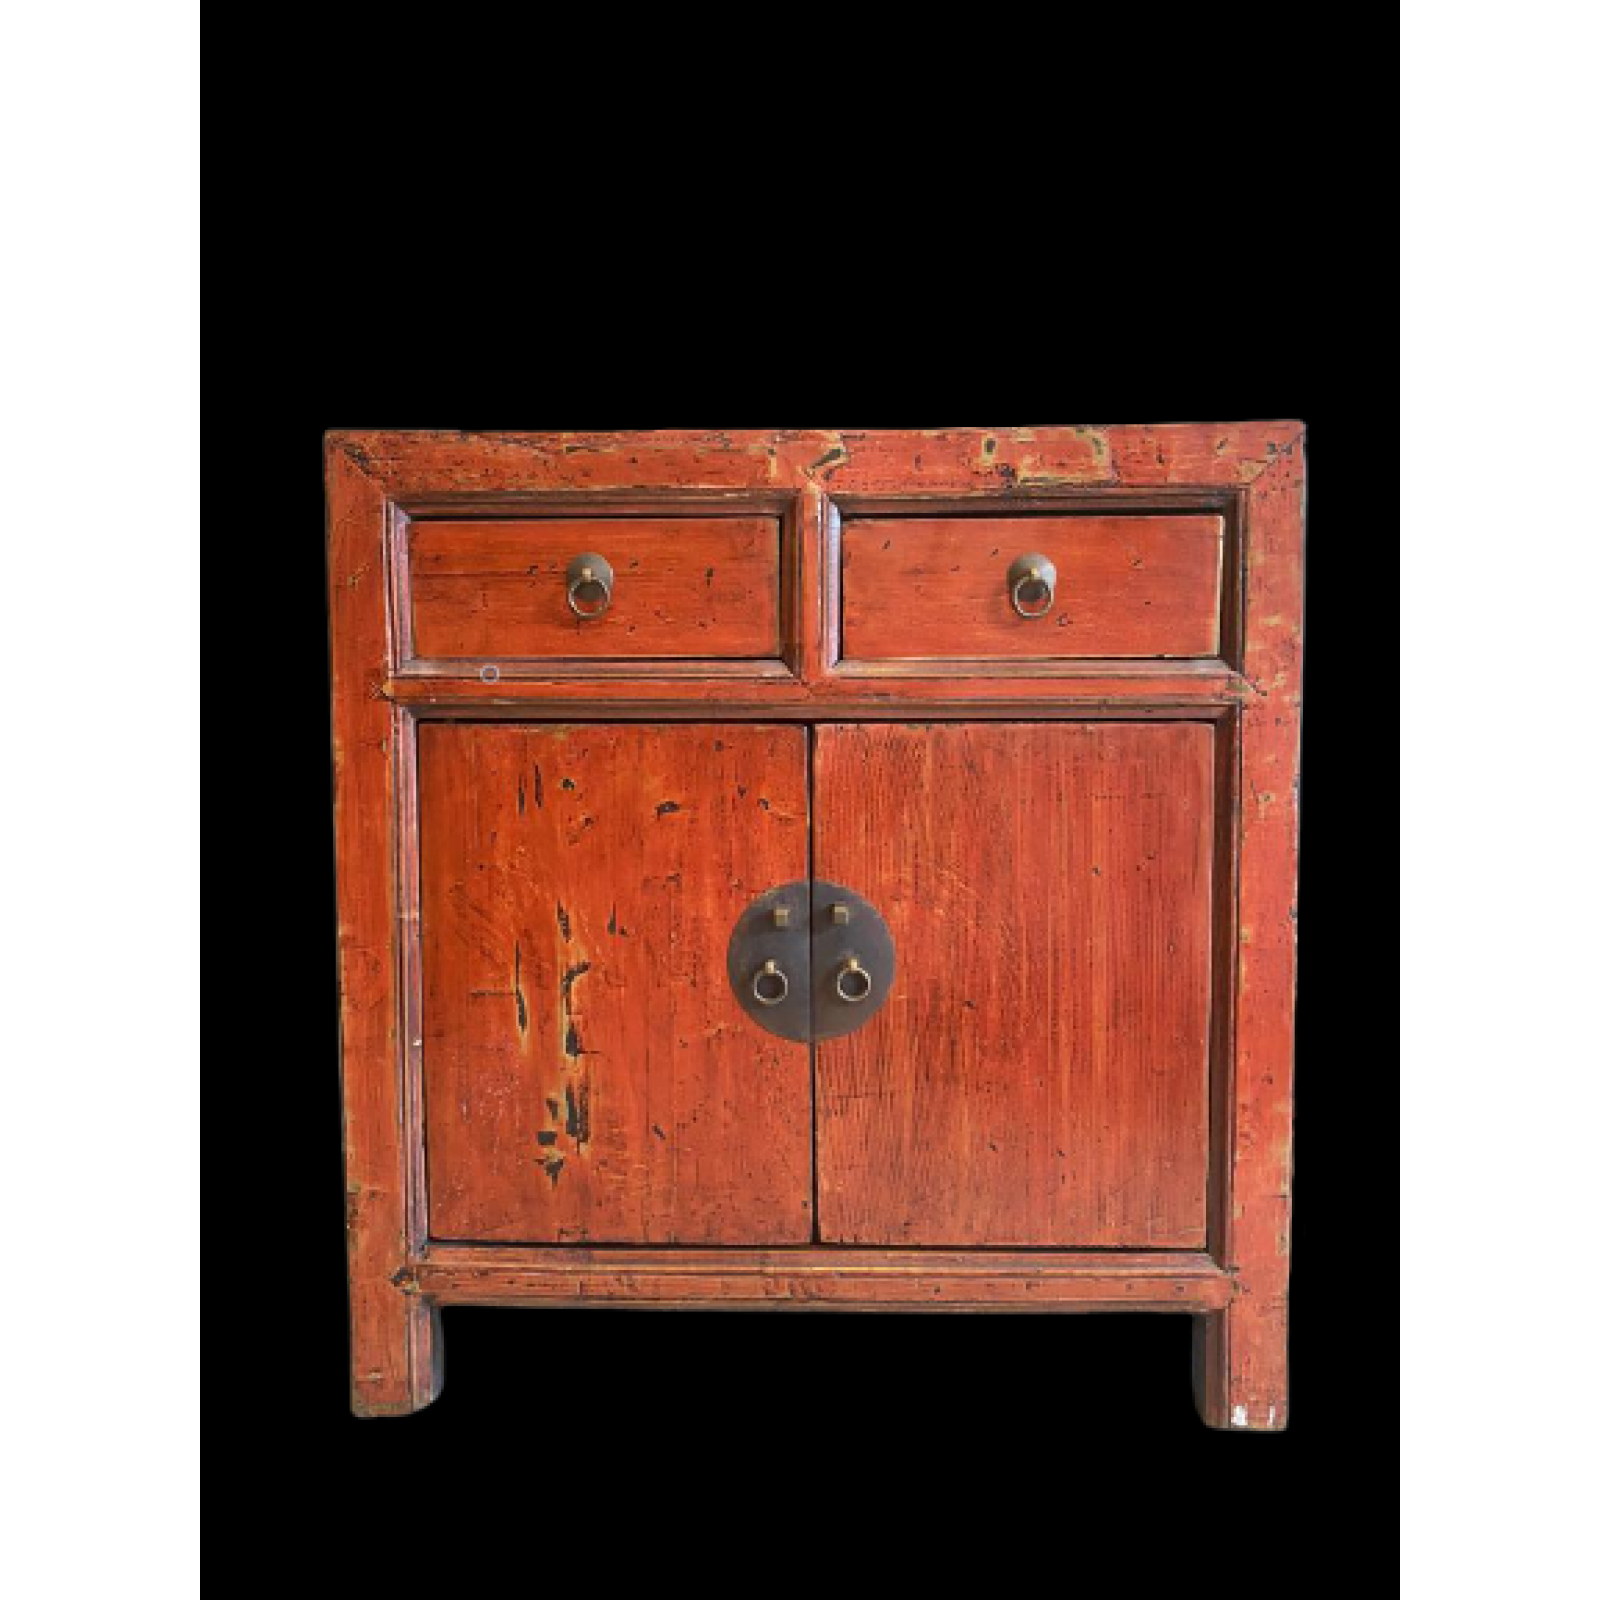 Red lacquer elm wood cabinet- Ms16295